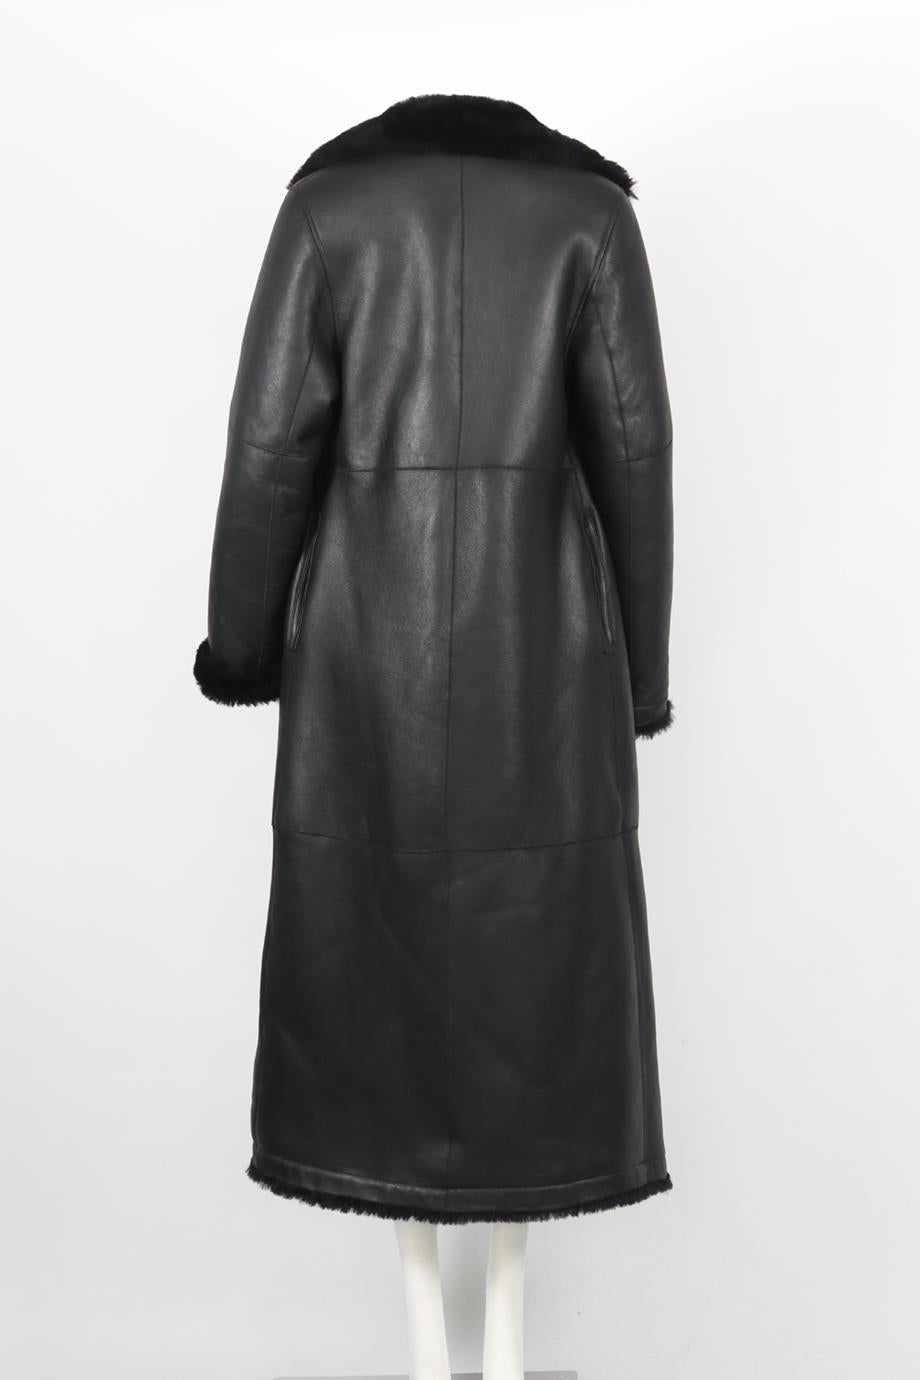 SAKS POTTS SHEARLING AND LEATHER COAT XSMALL